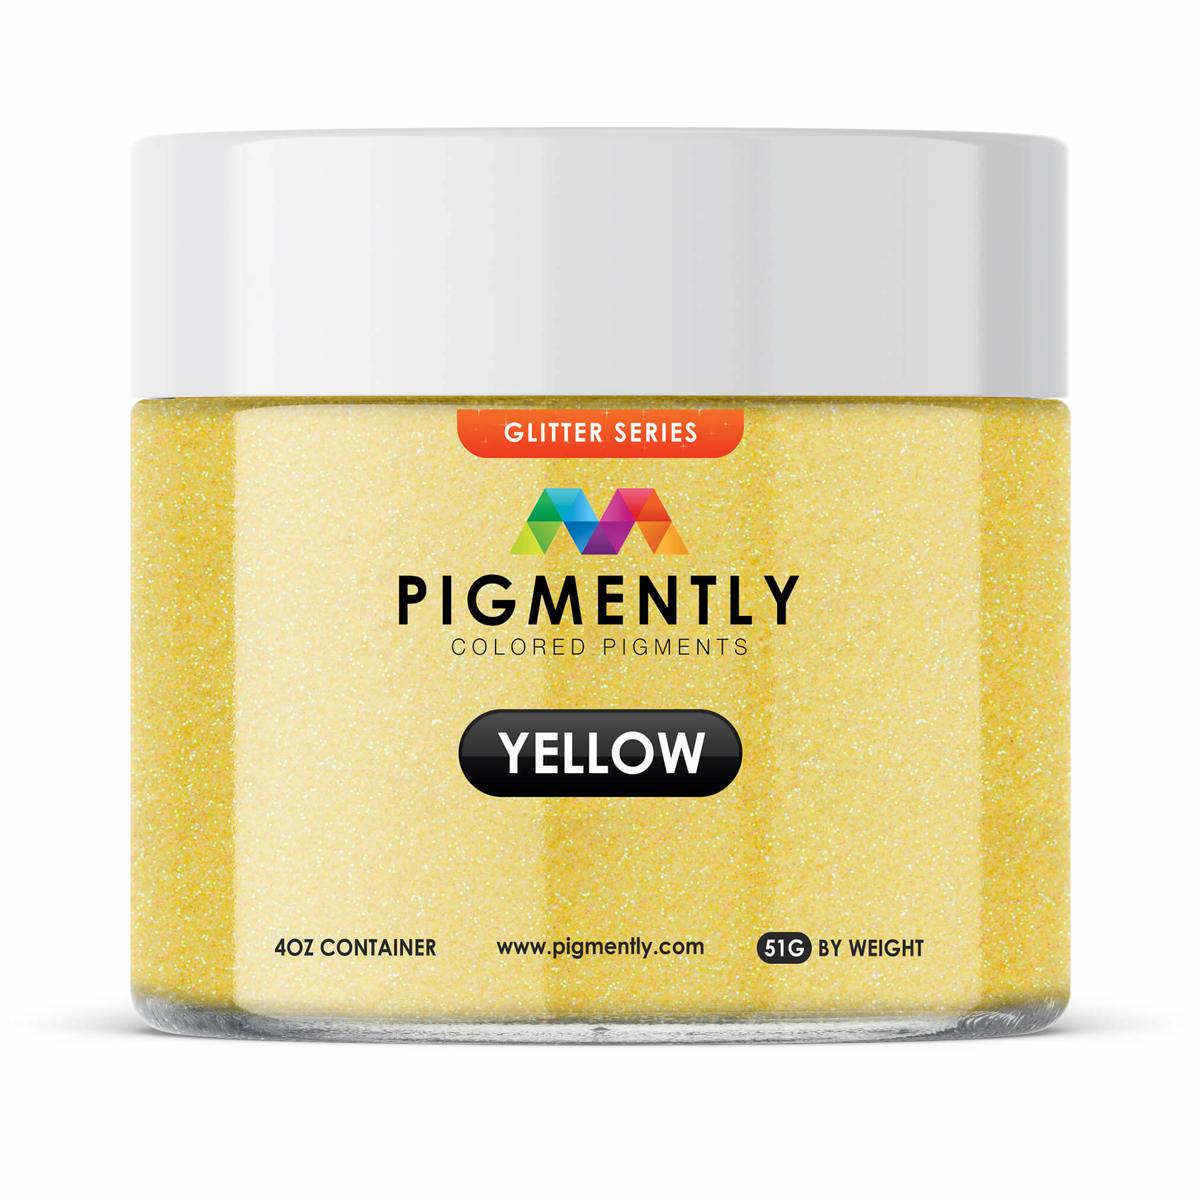 Gold Diamond Epoxy Color Powder by Pigmently